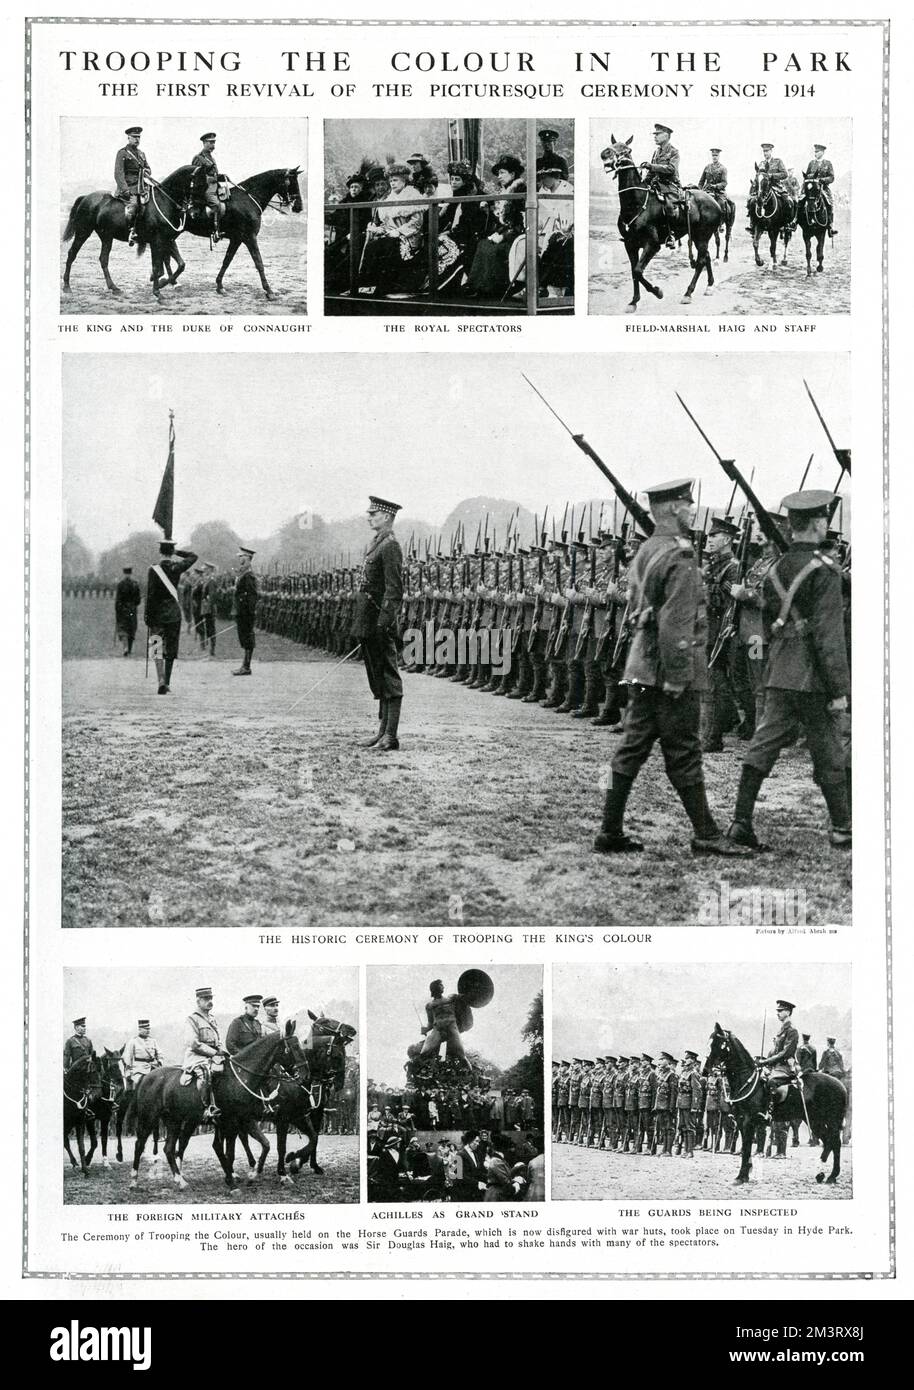 Trooping the Colour in Hyde Park. The first revival of the picturesque ceremony since 1914. The ceremony was usually held on Horse Guards Parade but it was disfigured with war huts. The hero of the occasion was Sir Douglas Haig, who had to shake hands with many of the spectators.      Date: 3rd June 1919 Stock Photo